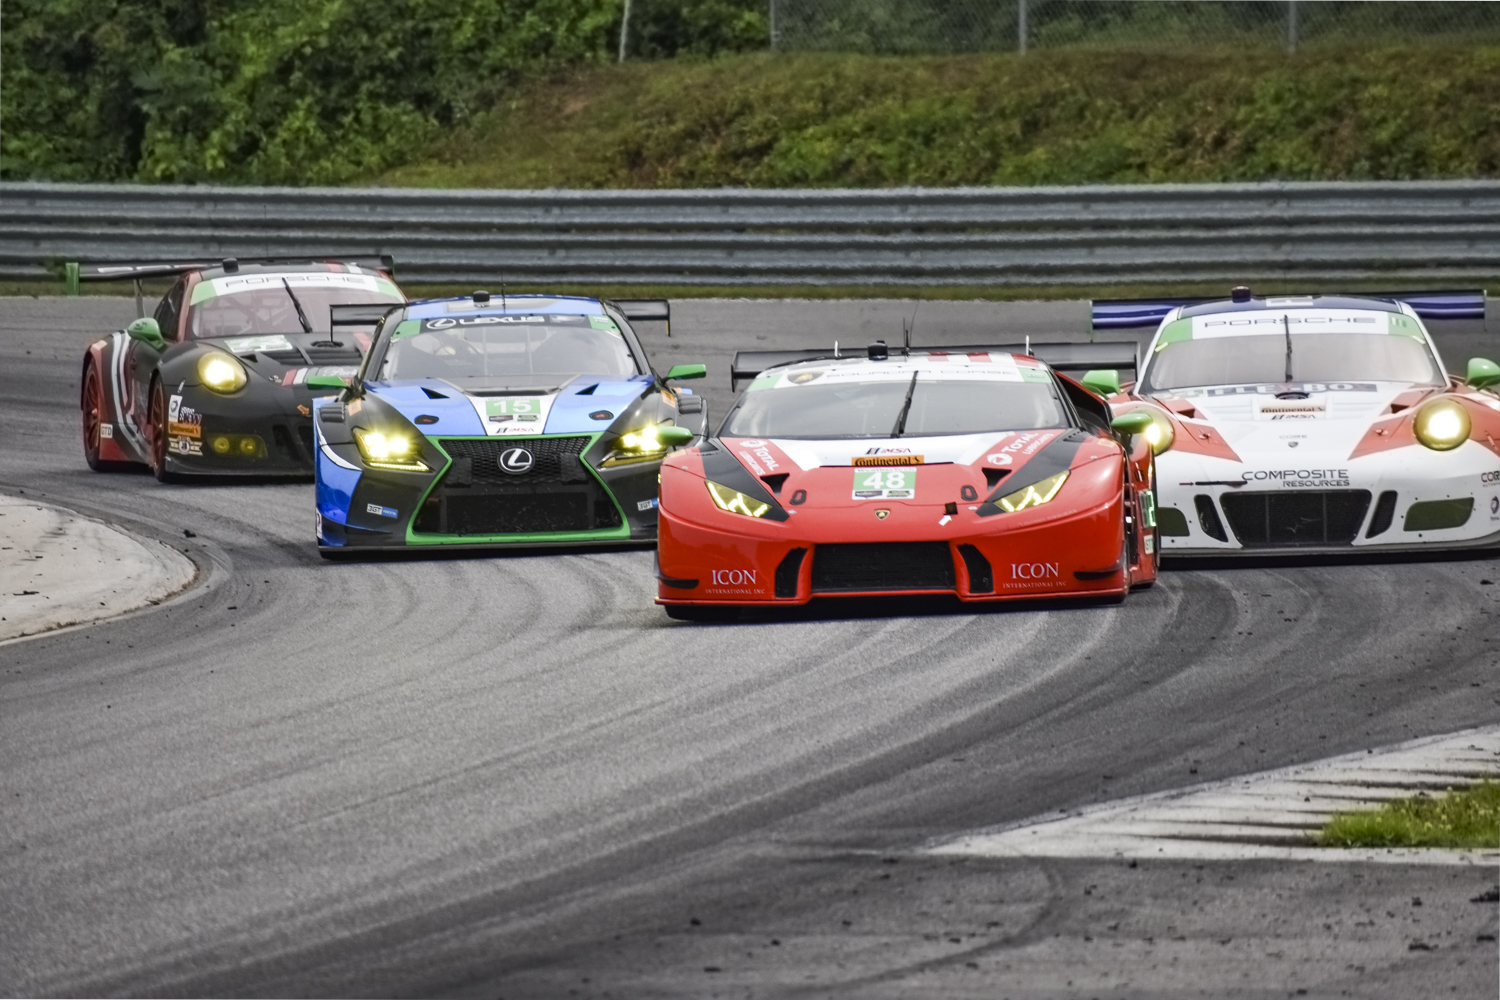 Racing shot showing the Lexus RC F GT3 making a pass (in third place)